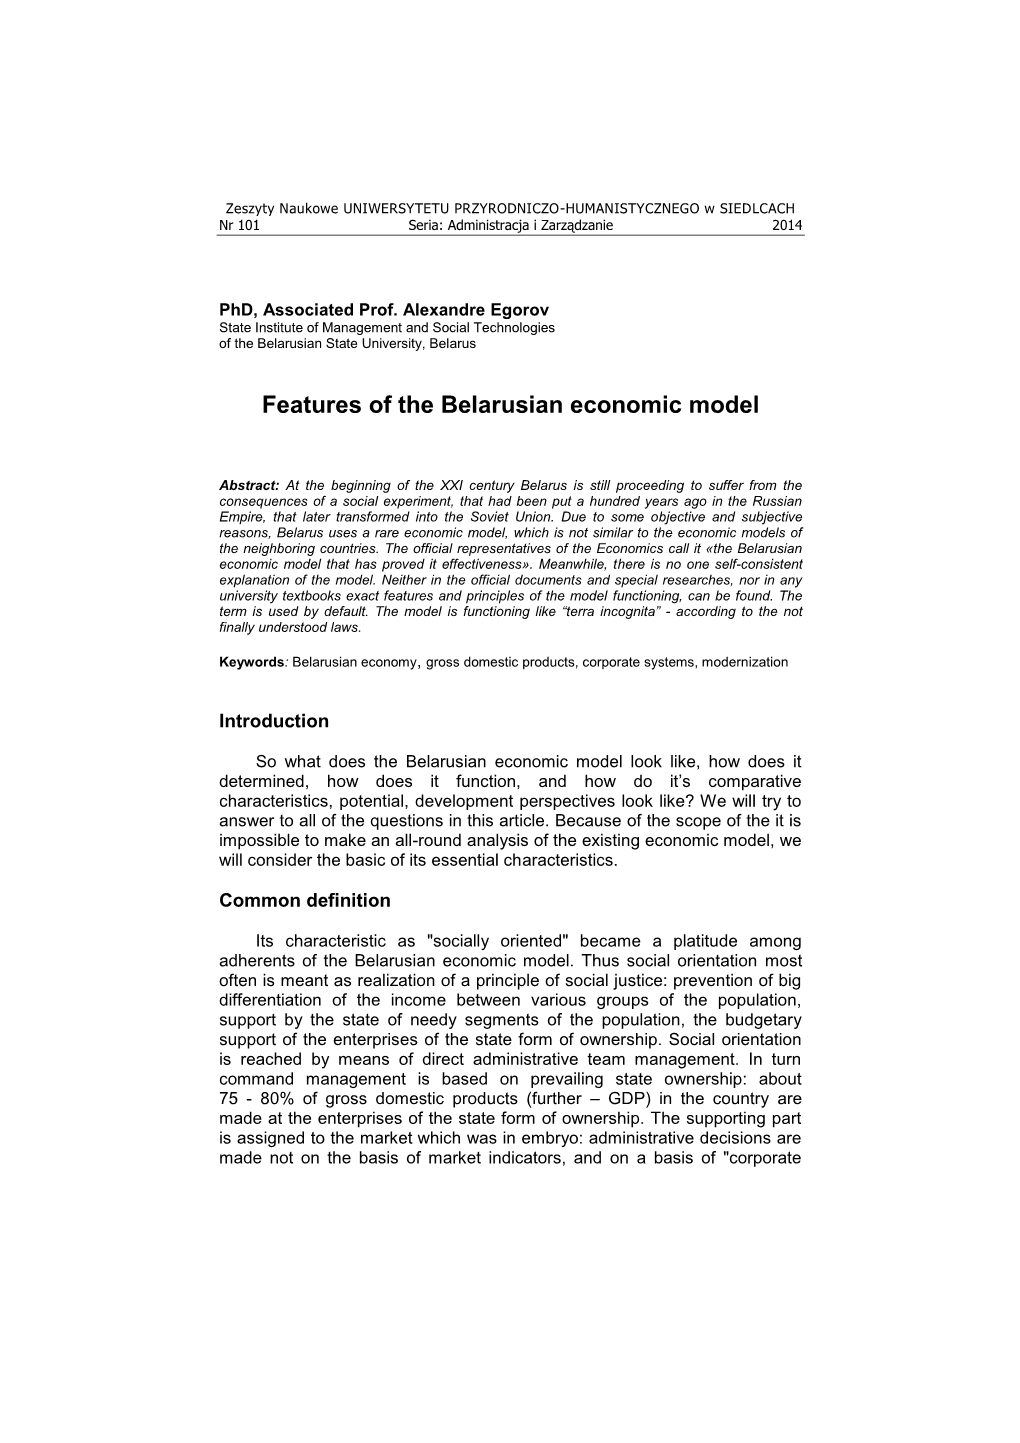 Features of the Belarusian Economic Model